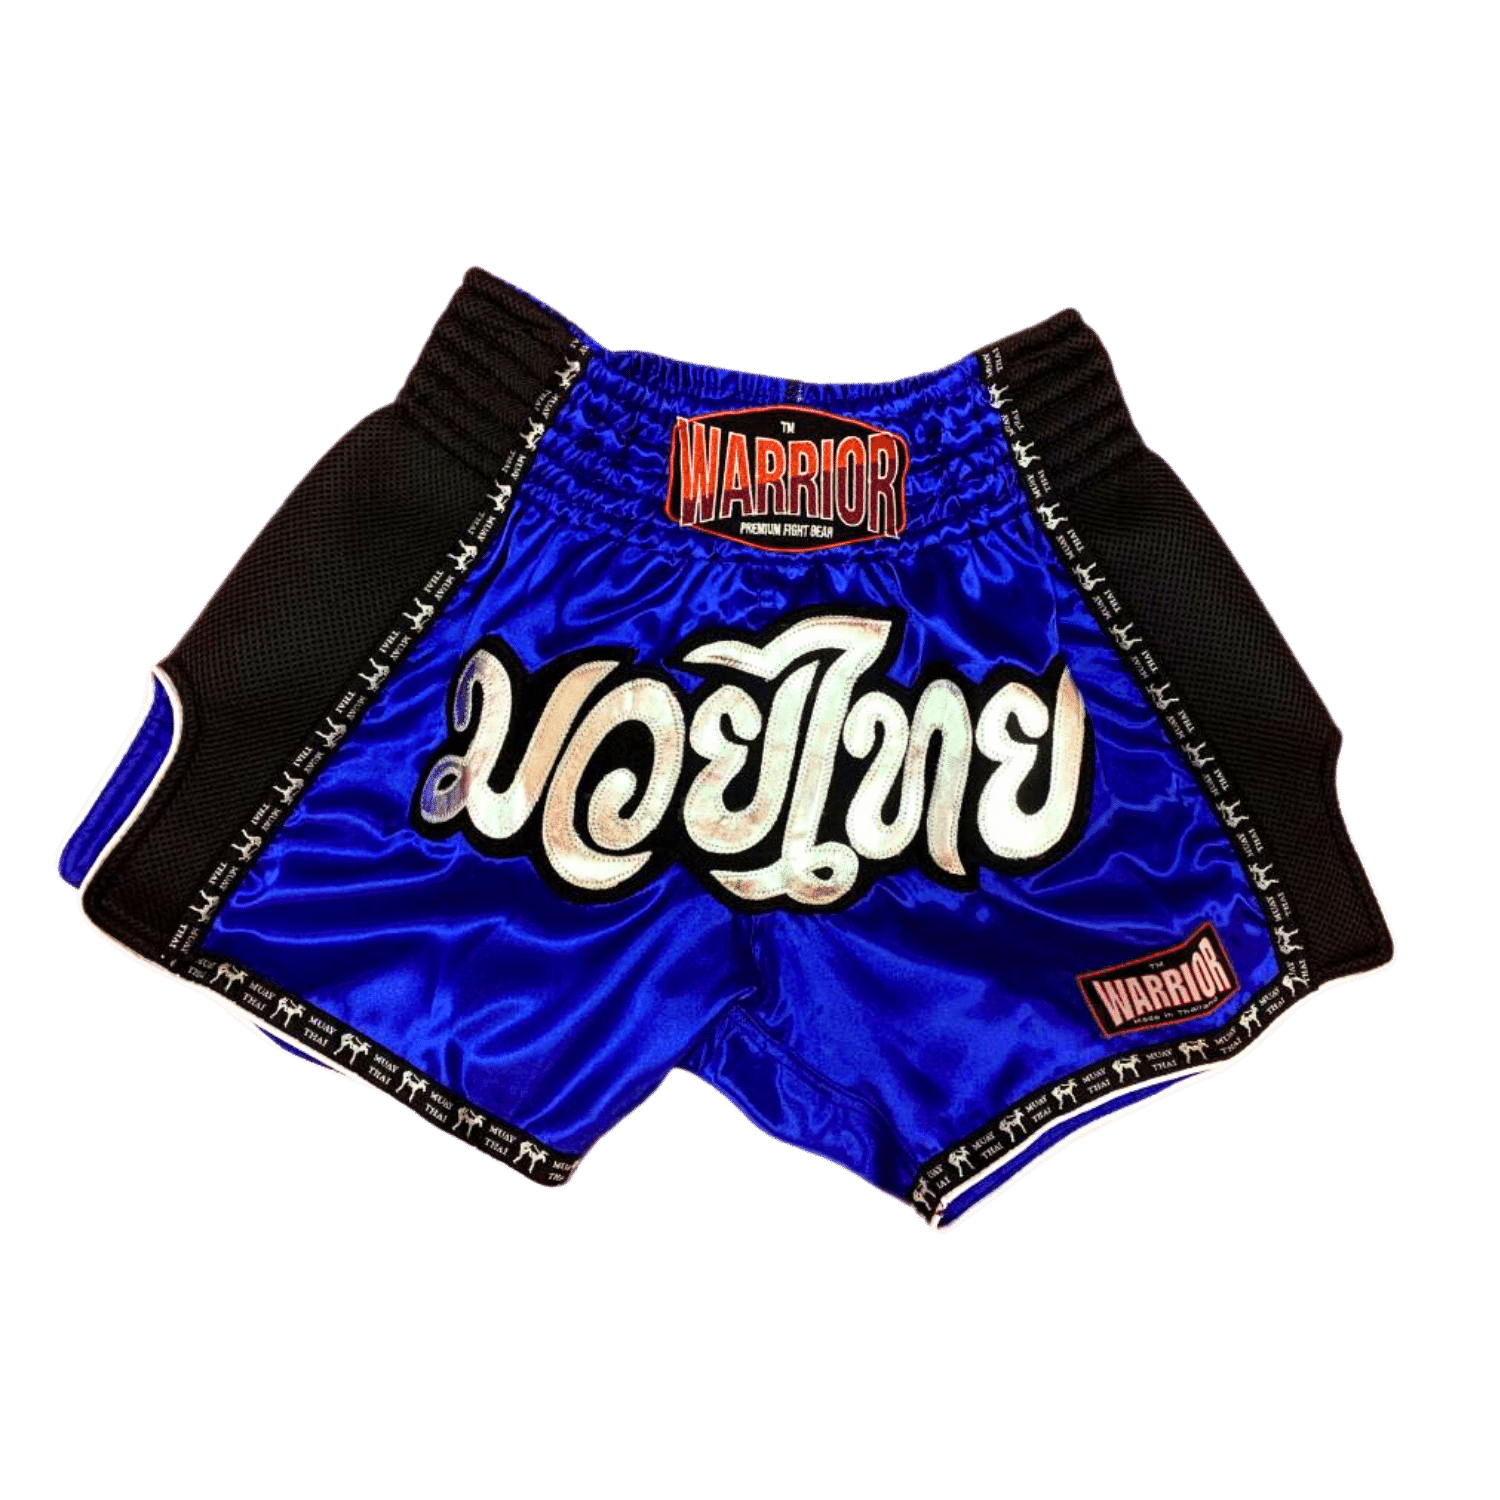 A pair of Blue Warrior Muay Thai Boxing Shorts from Hanuthai.